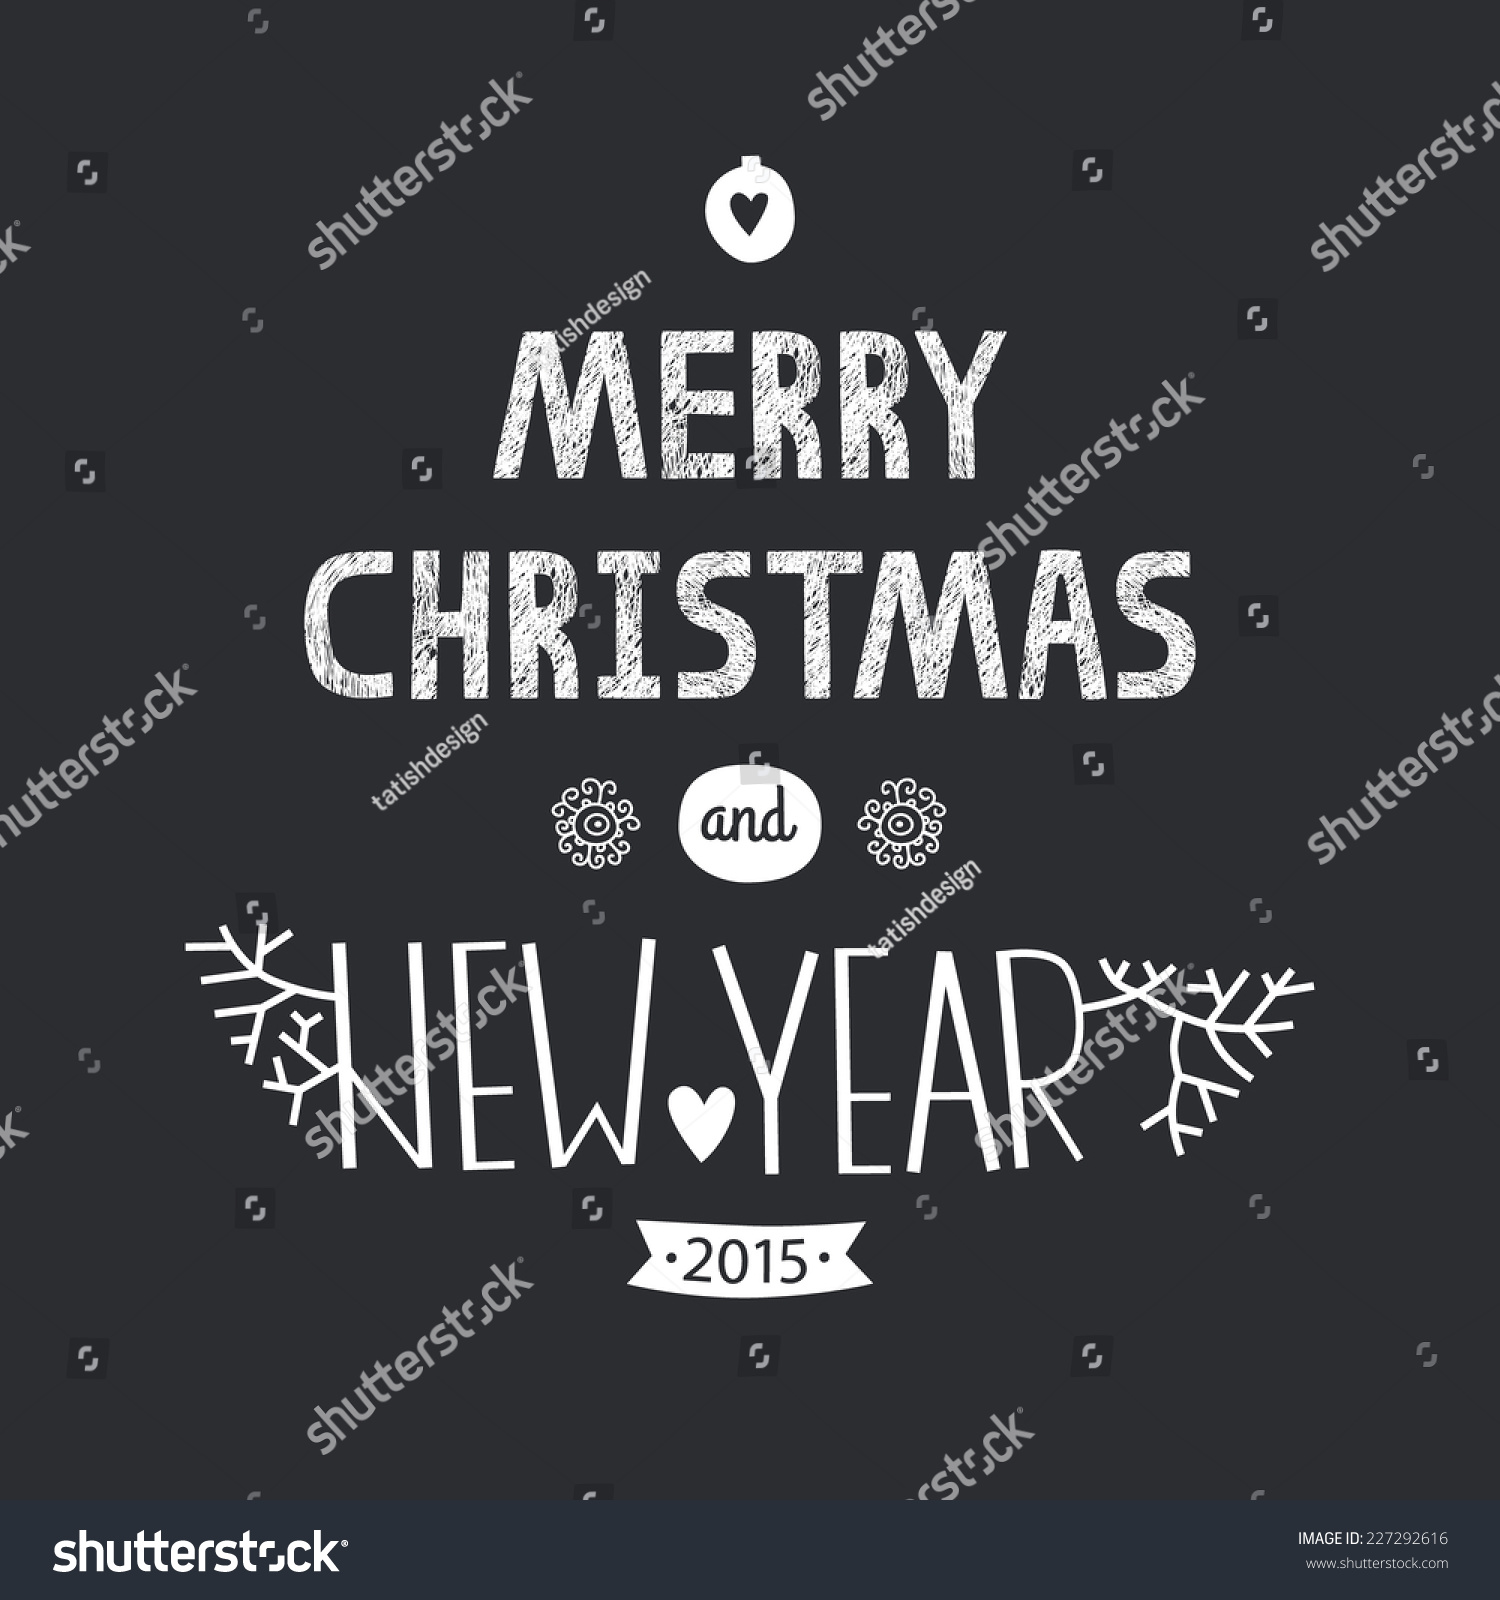 Vector christmas greeting card with new year lettering Illustration on black background 2015 EPS10